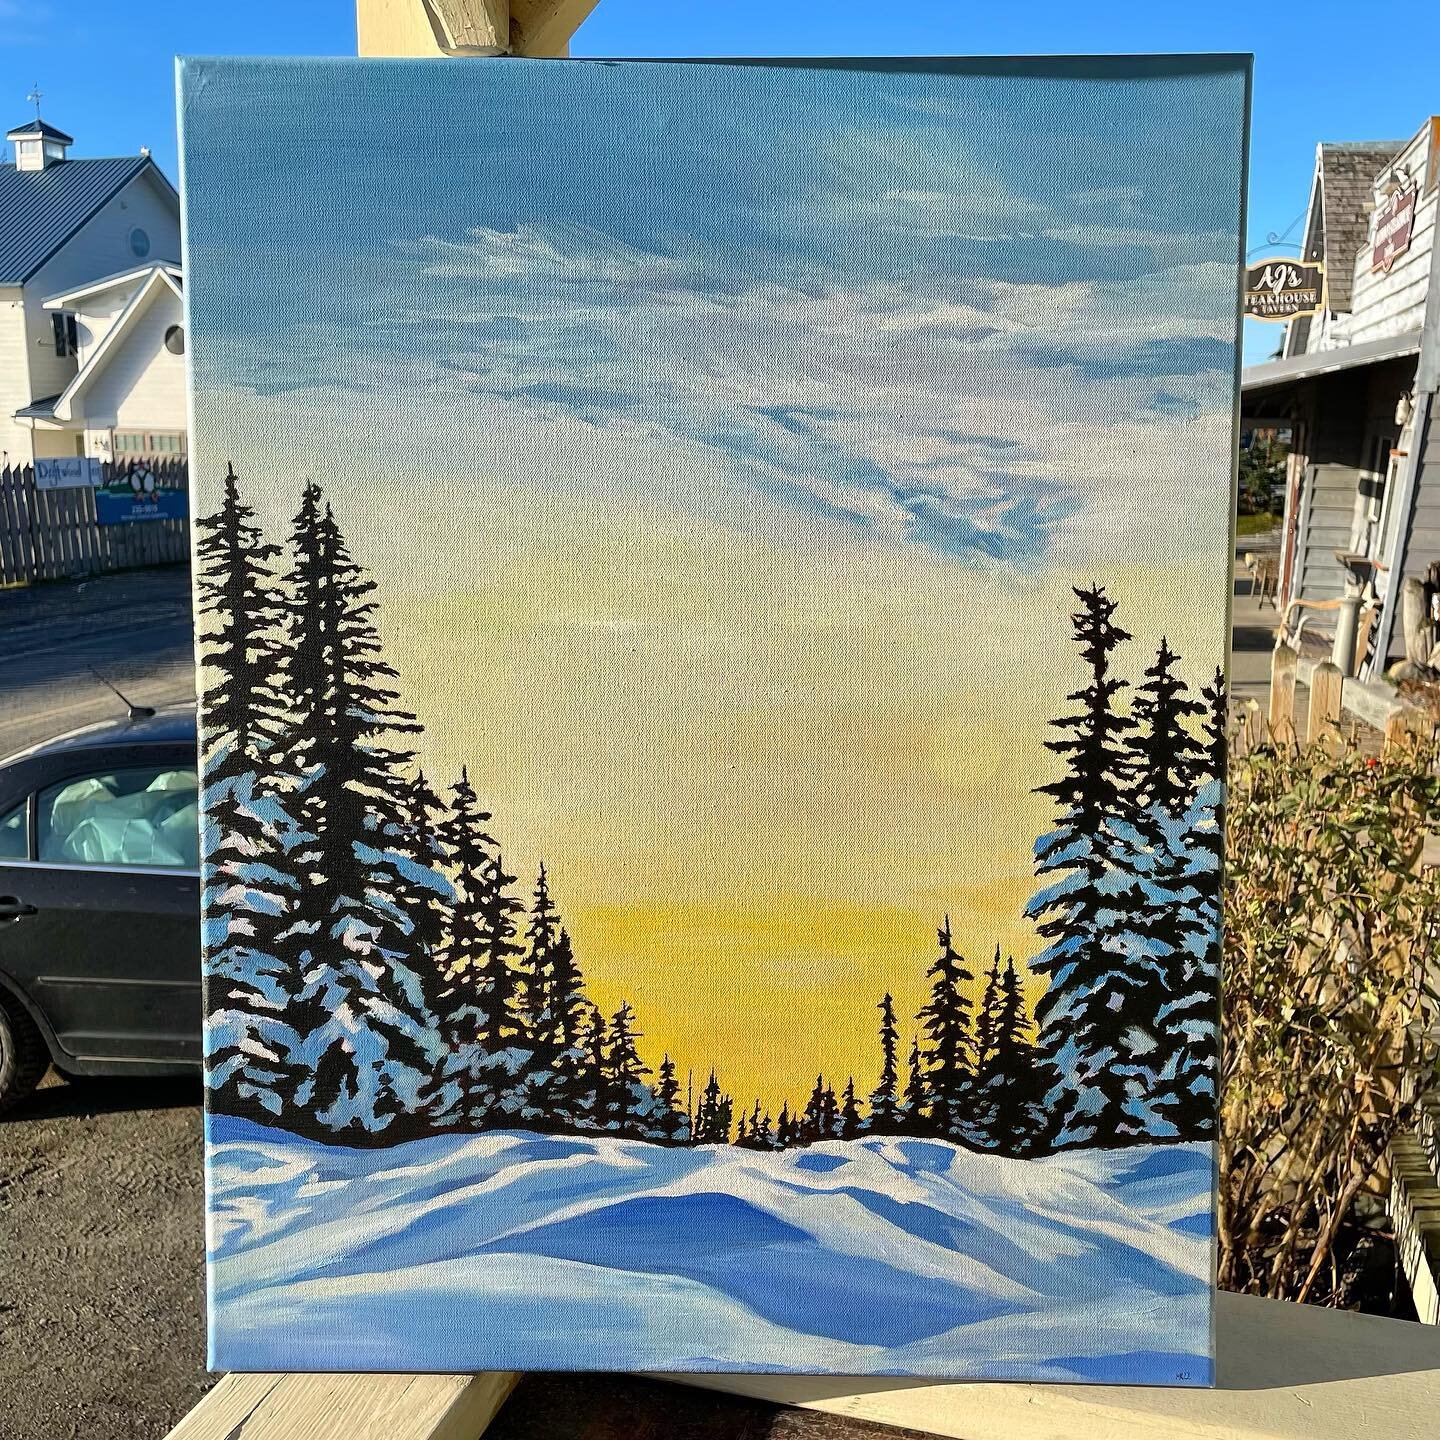 Searching for an oil painting that gives you a window to the beautiful views of Alaska, right in your home? 

M&eacute;tis Quoi is a local Plein Air artist and owner of Homer Haberdashery! Her originals and prints live here at the bistro, and we&rsqu